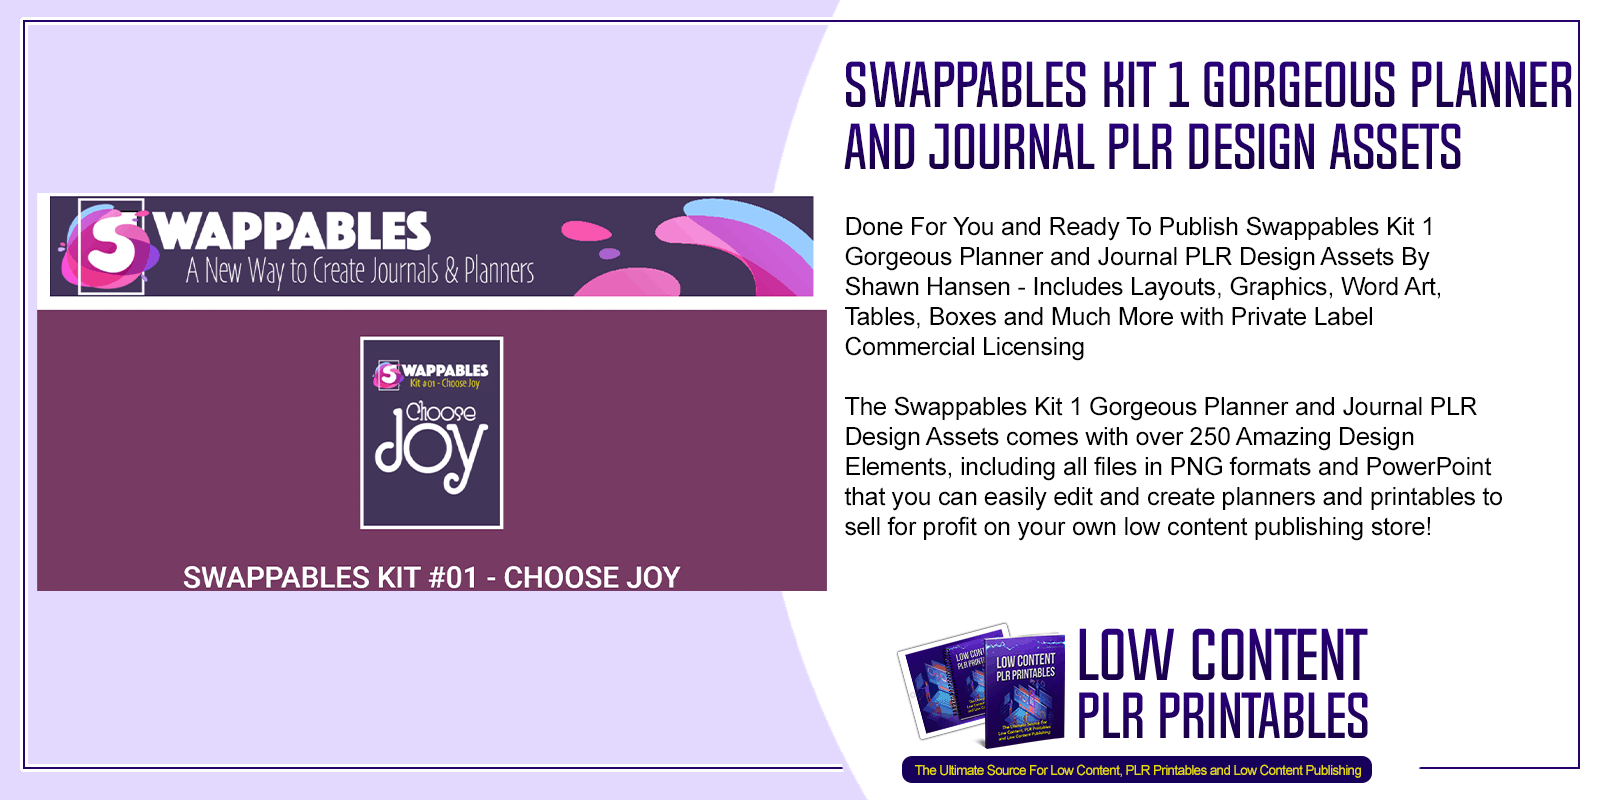 Swappables Kit 1 Gorgeous Planner and Journal PLR Design Assets